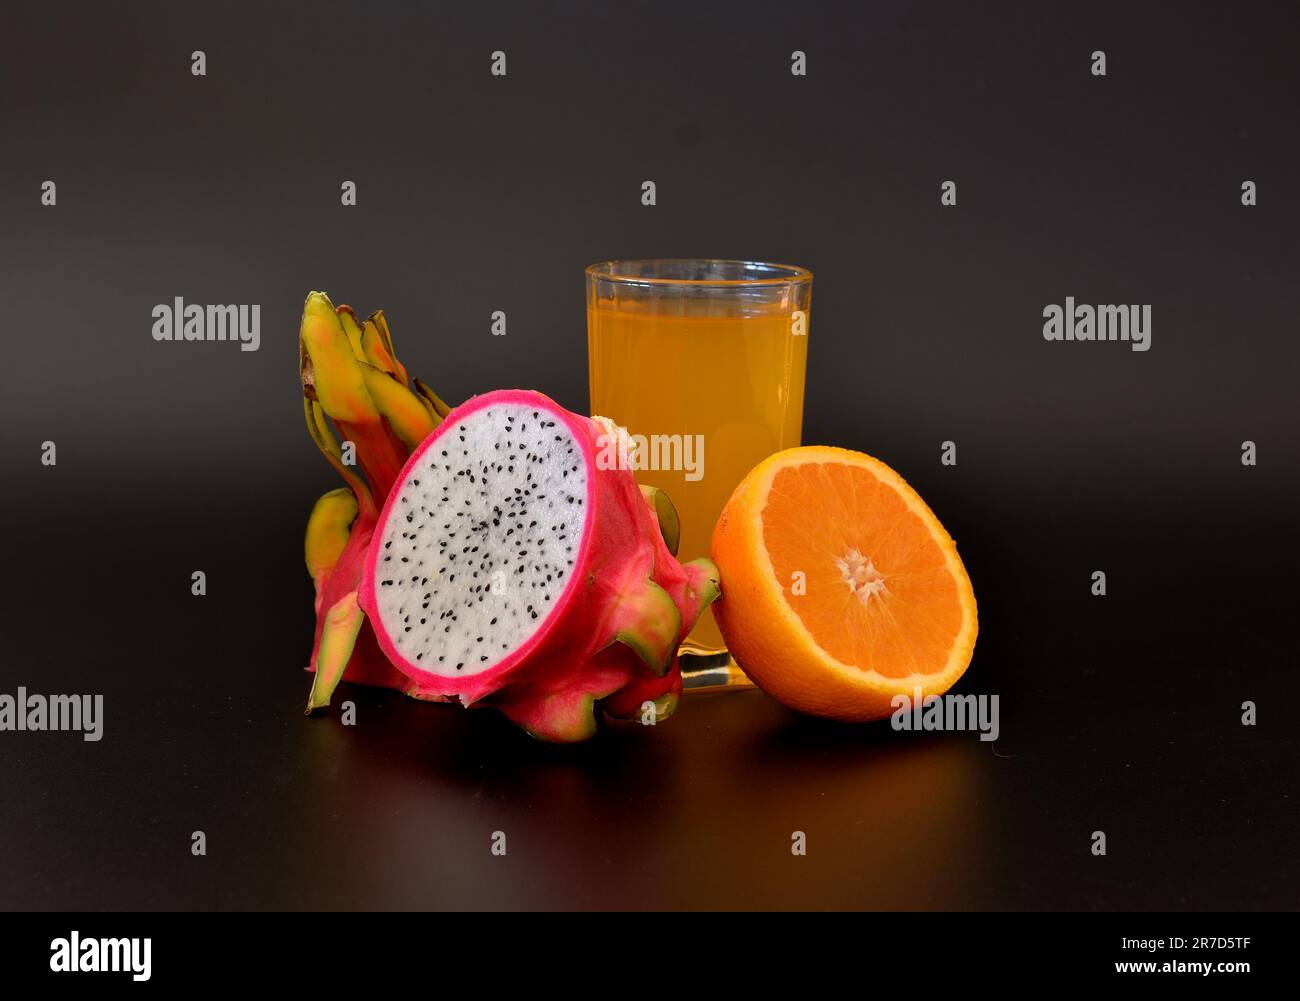 A tall glass of fruit juice and half a ripe orange and pitaya on a black background. Close-up. Stock Photo